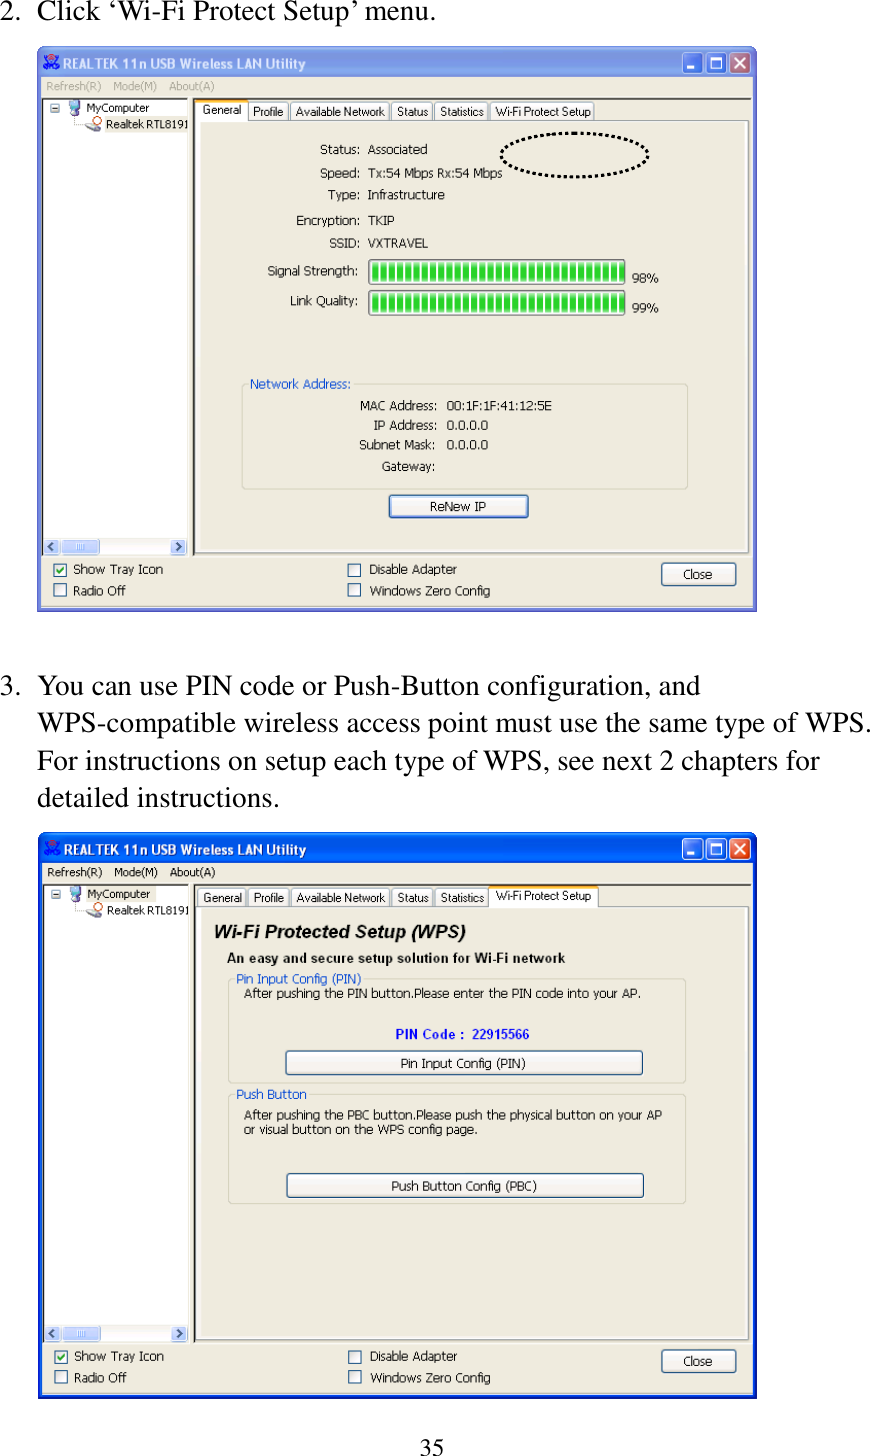 35  2. Click ‘Wi-Fi Protect Setup’ menu.   3. You can use PIN code or Push-Button configuration, and WPS-compatible wireless access point must use the same type of WPS. For instructions on setup each type of WPS, see next 2 chapters for detailed instructions.  